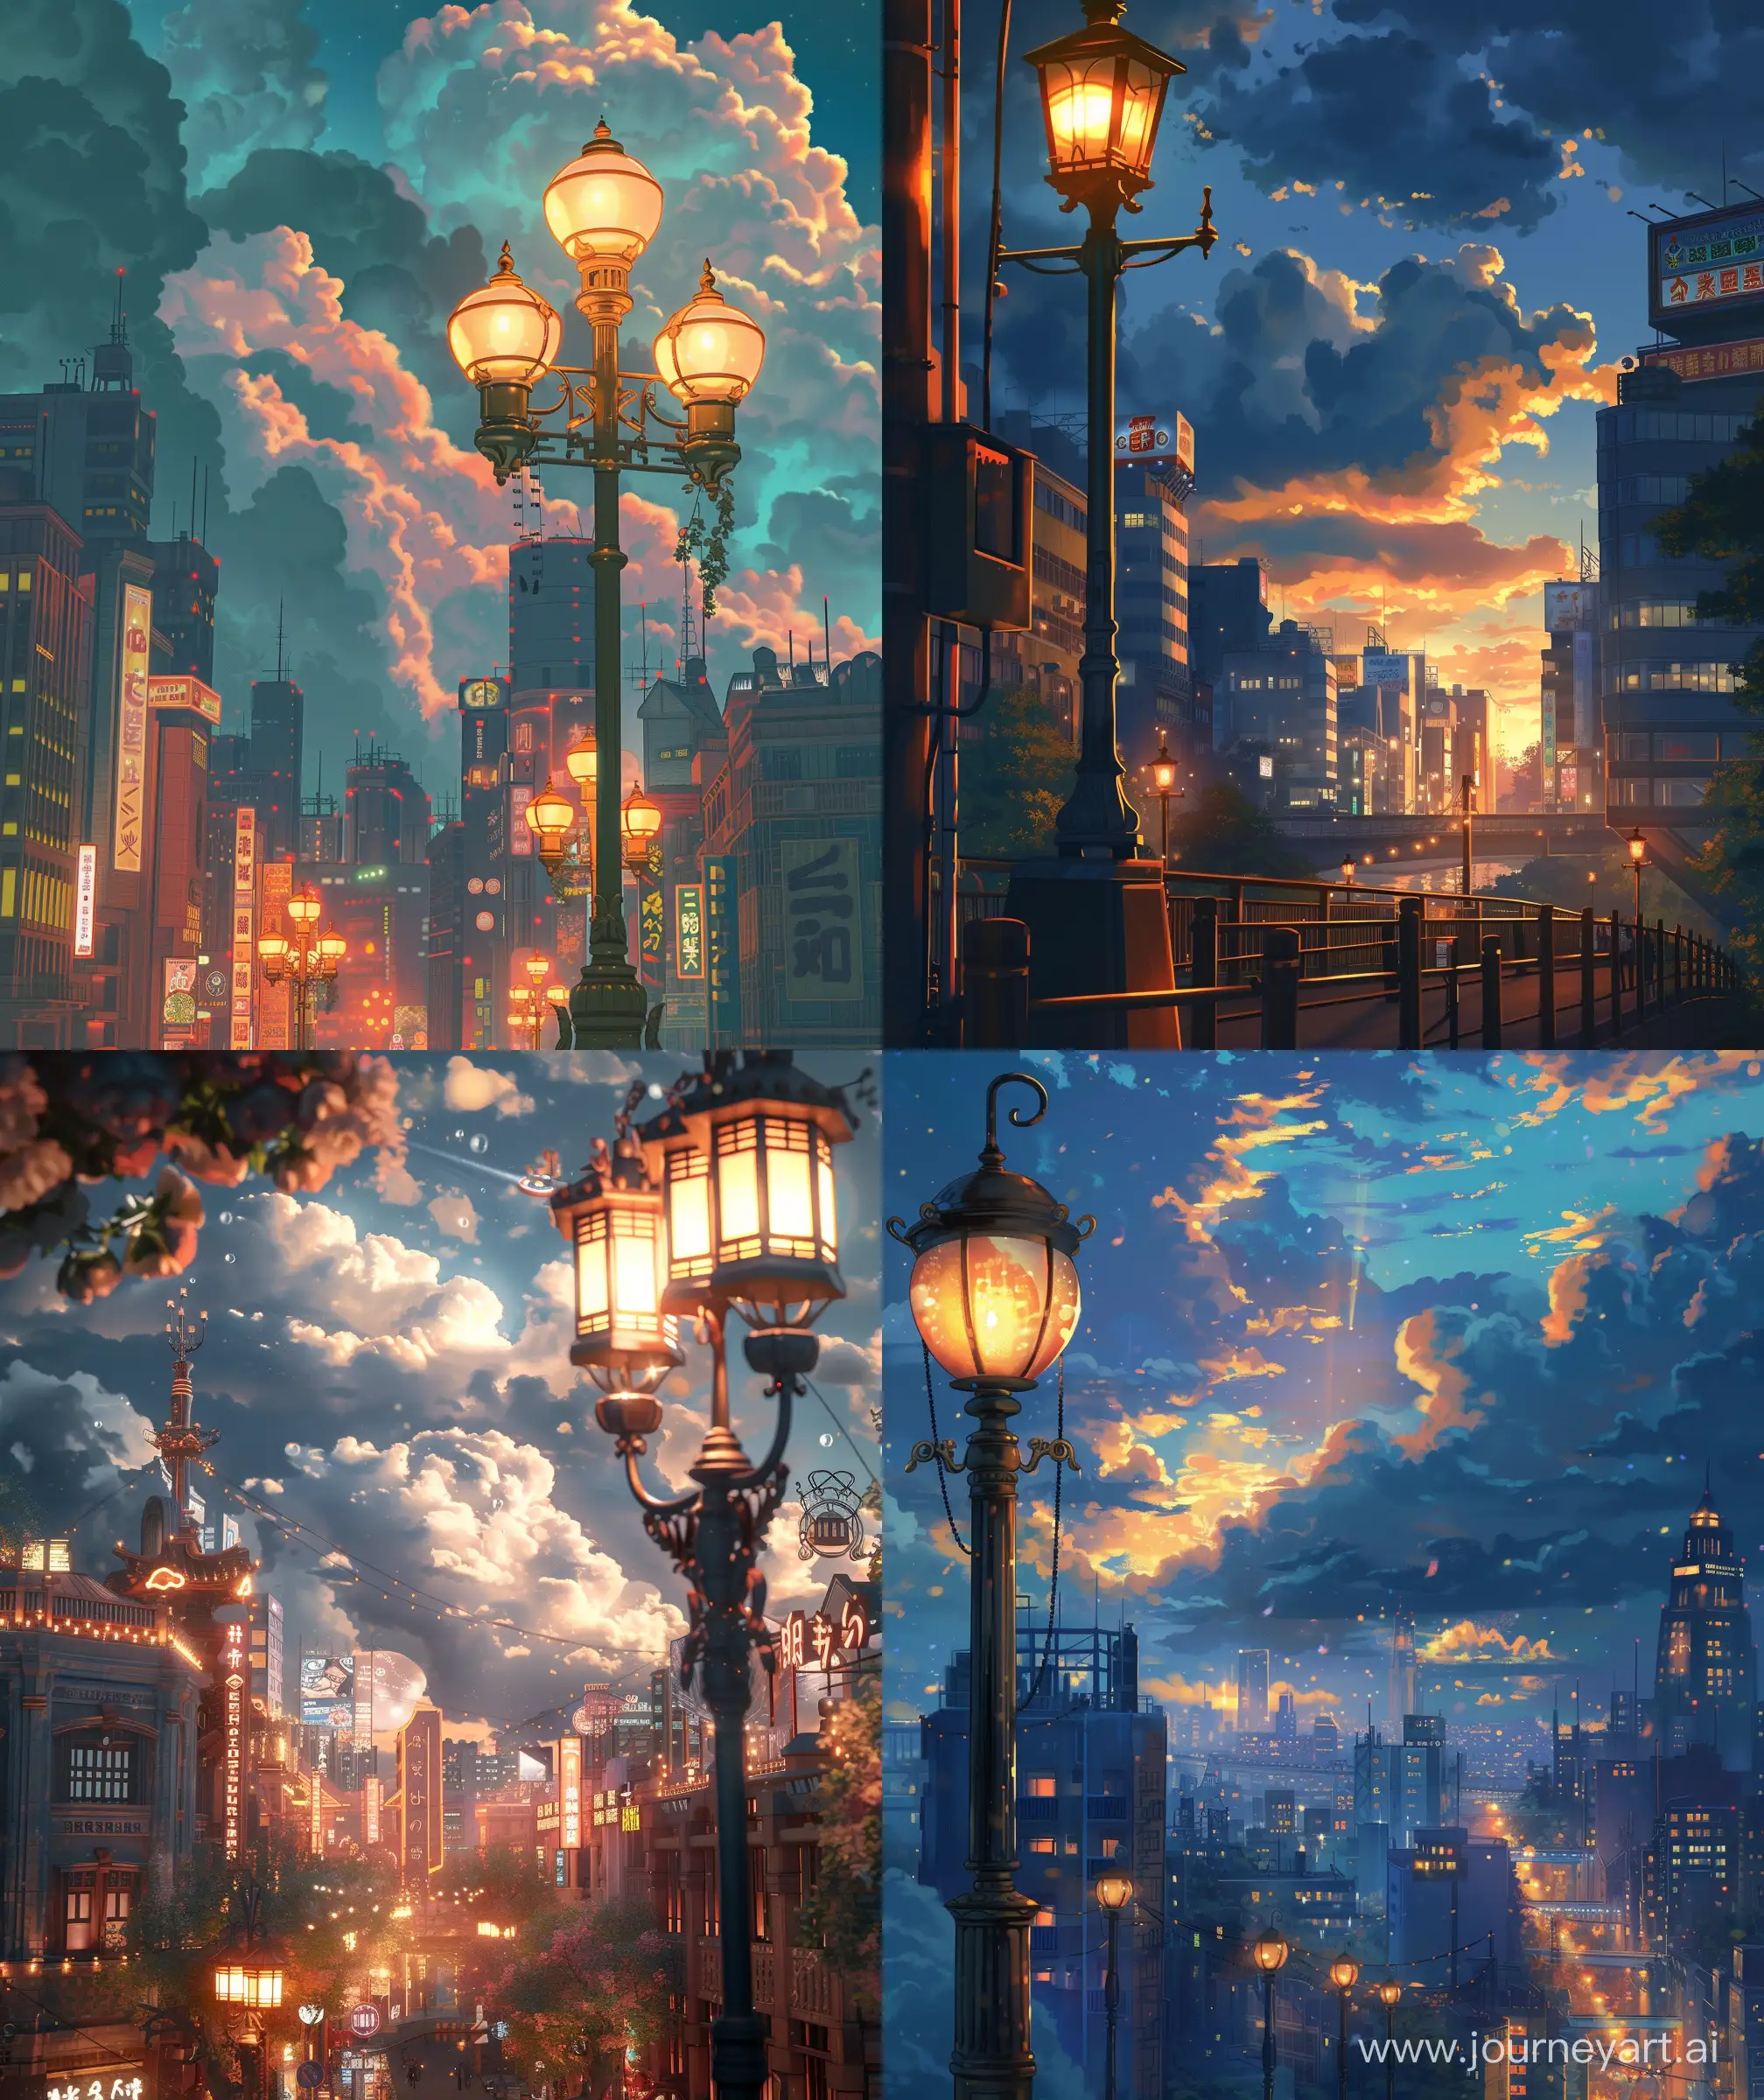 Mesmerizing-Evening-Anime-Scenery-in-a-Beautifully-Decorated-Metropolitan-City